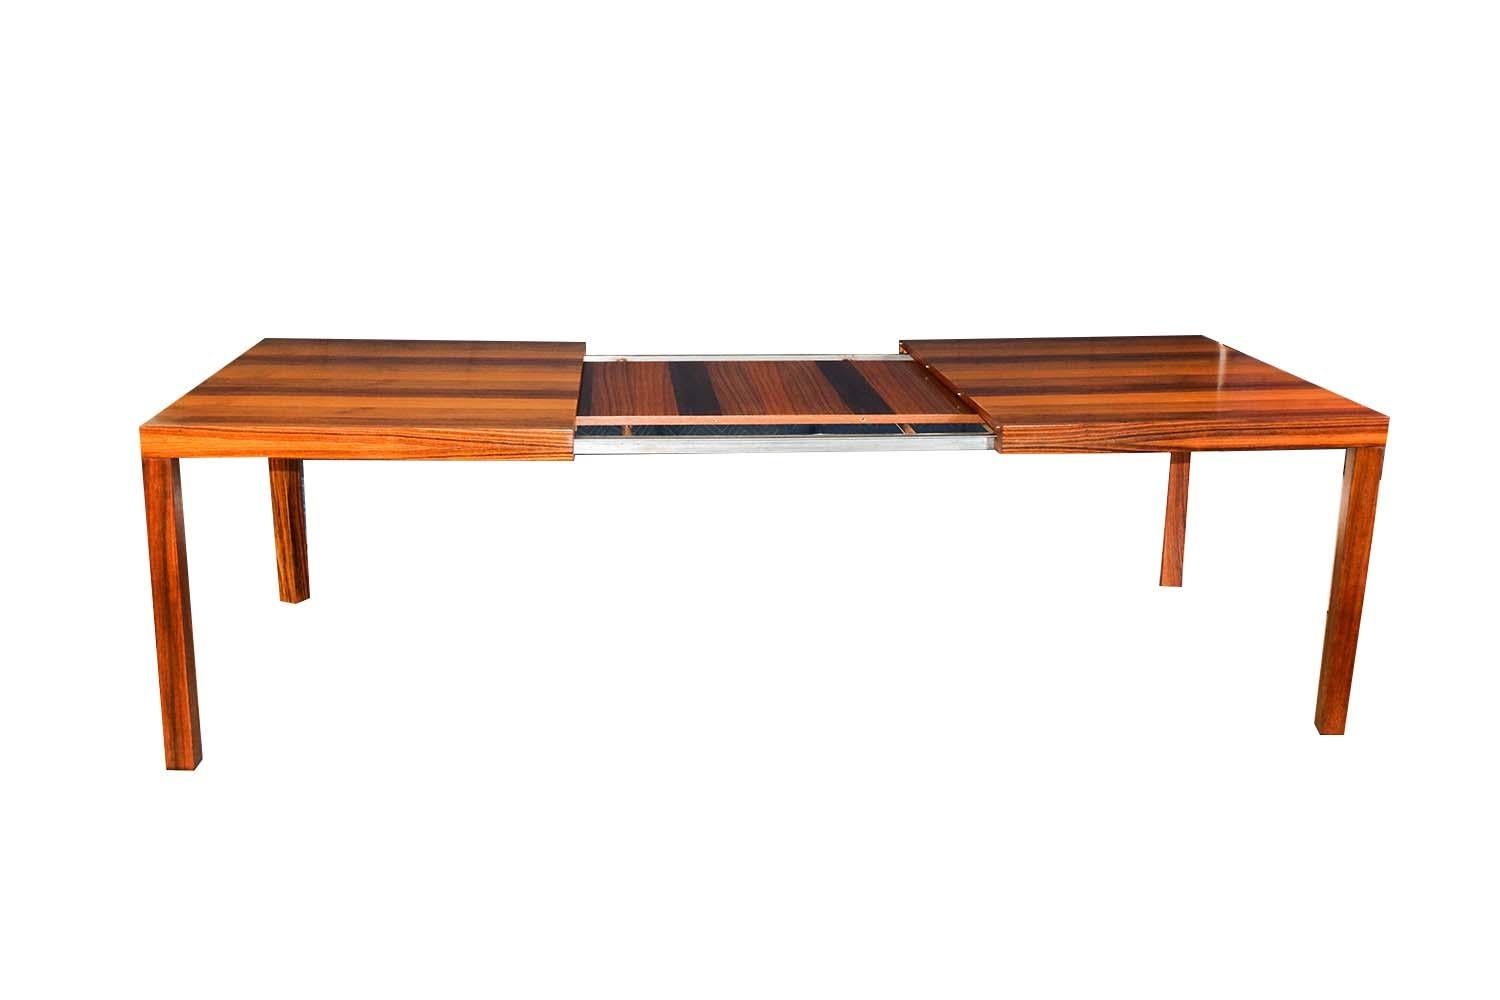 Midcentury Danish Parsons Dining Table Dyrlund Denmark Tri-Wood In Good Condition For Sale In Baltimore, MD